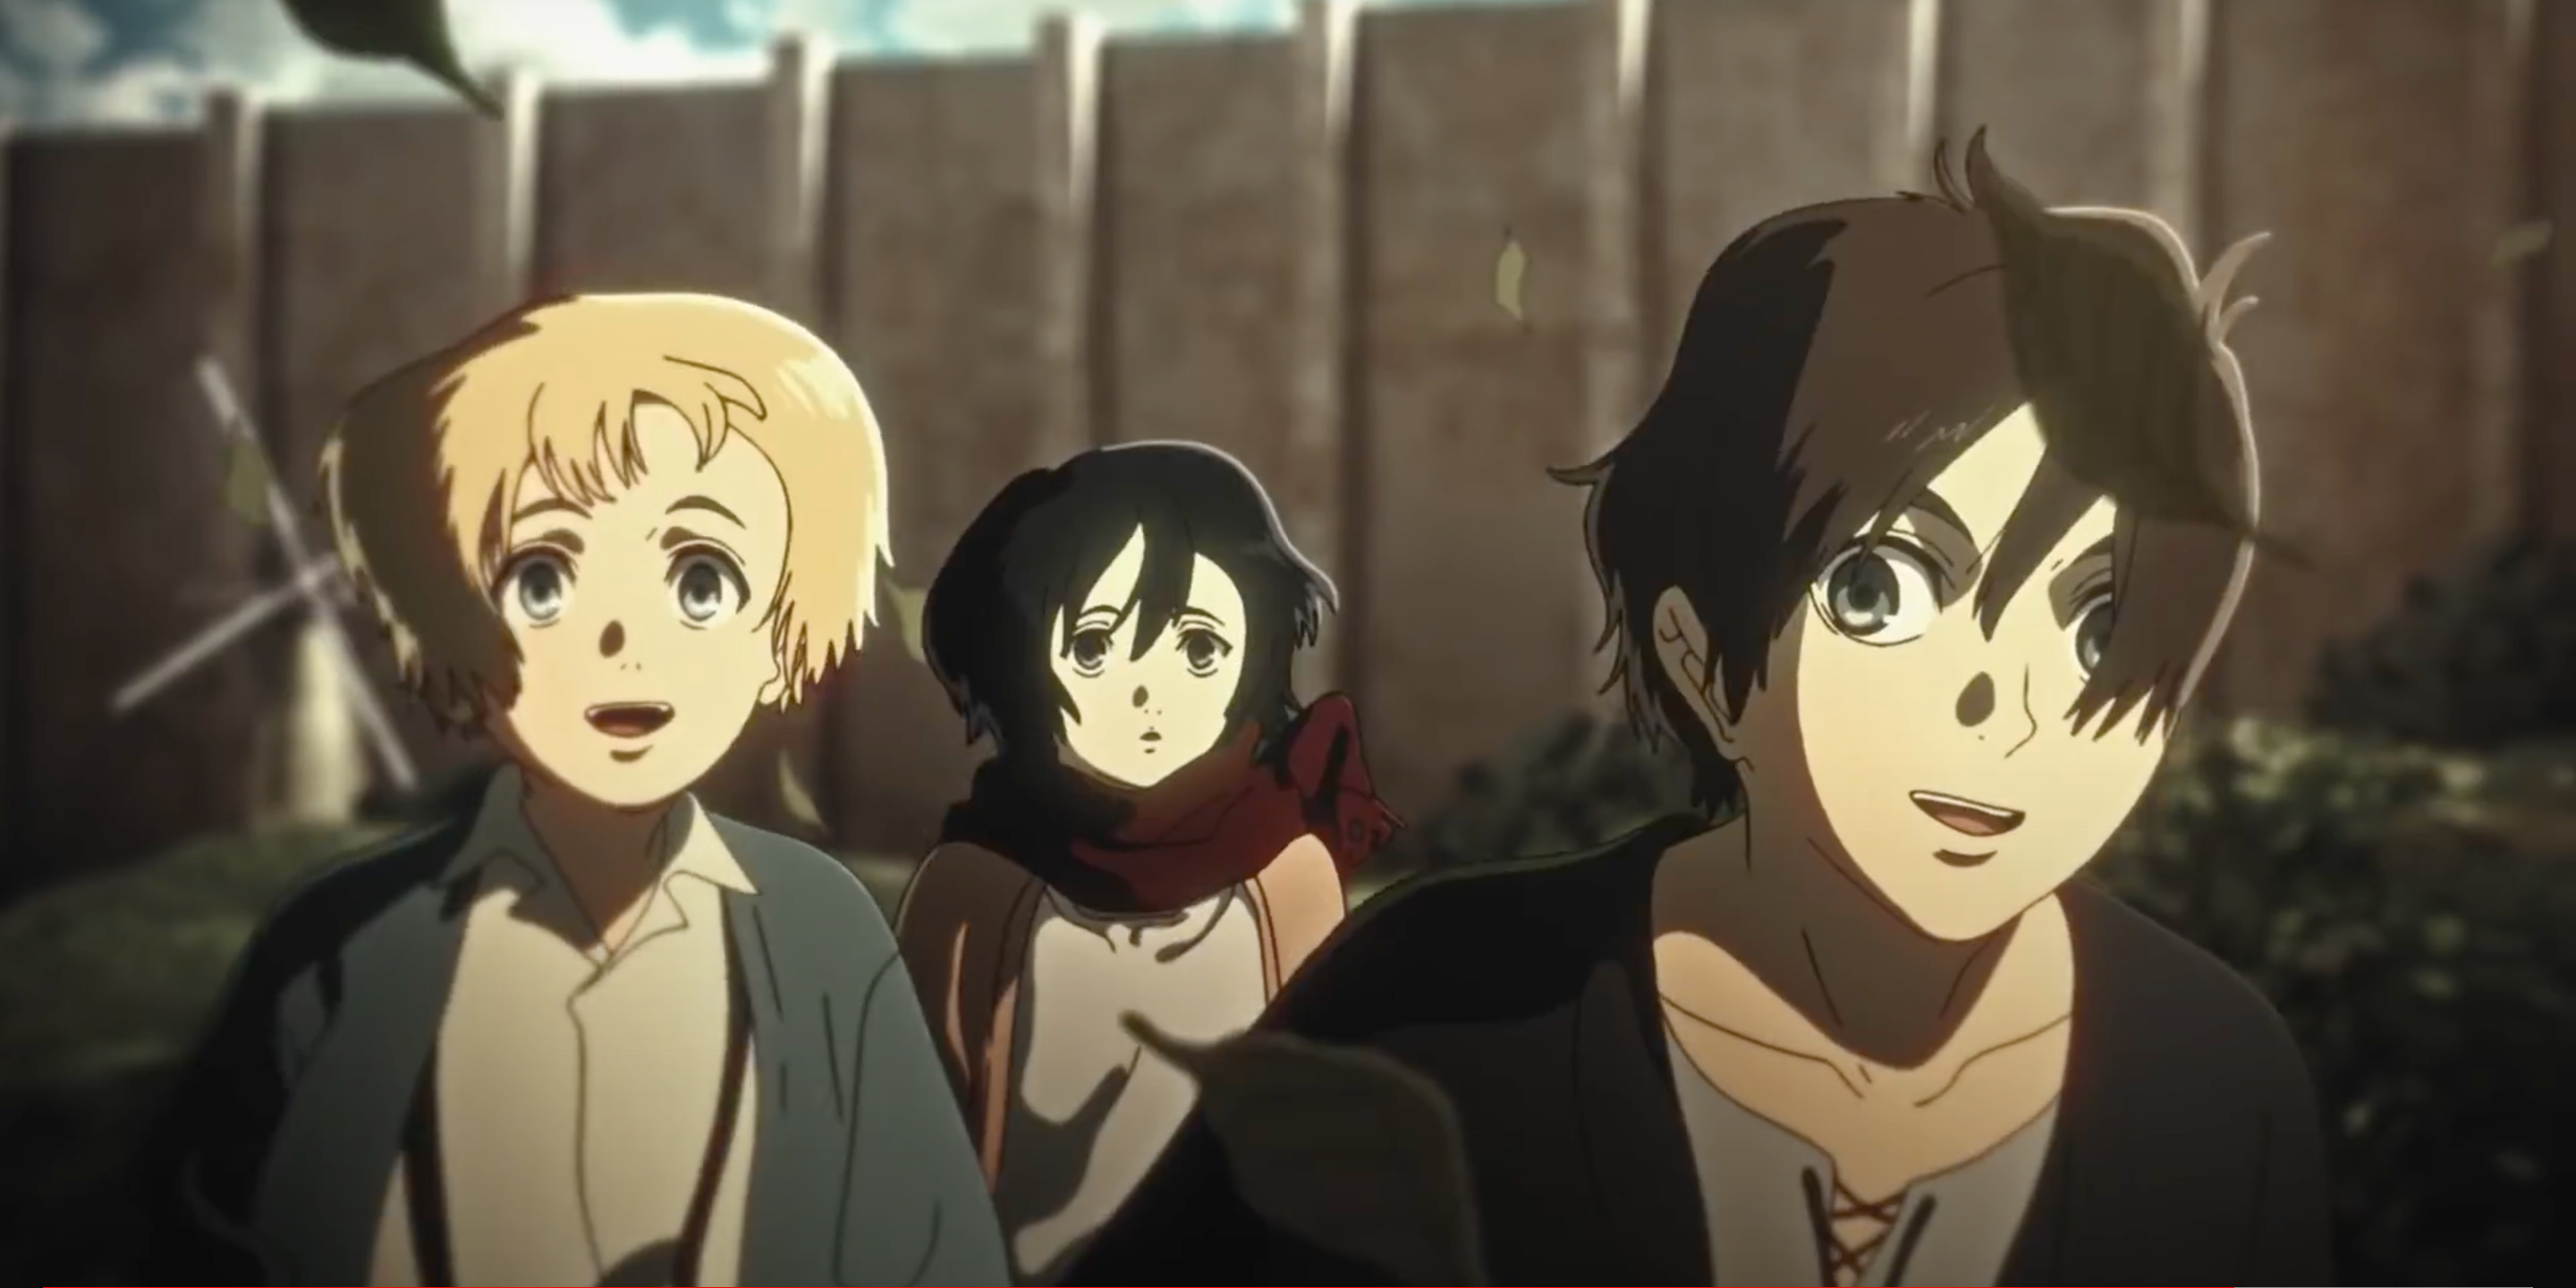 Young Eren, Mikasa, and Armin in their hometown